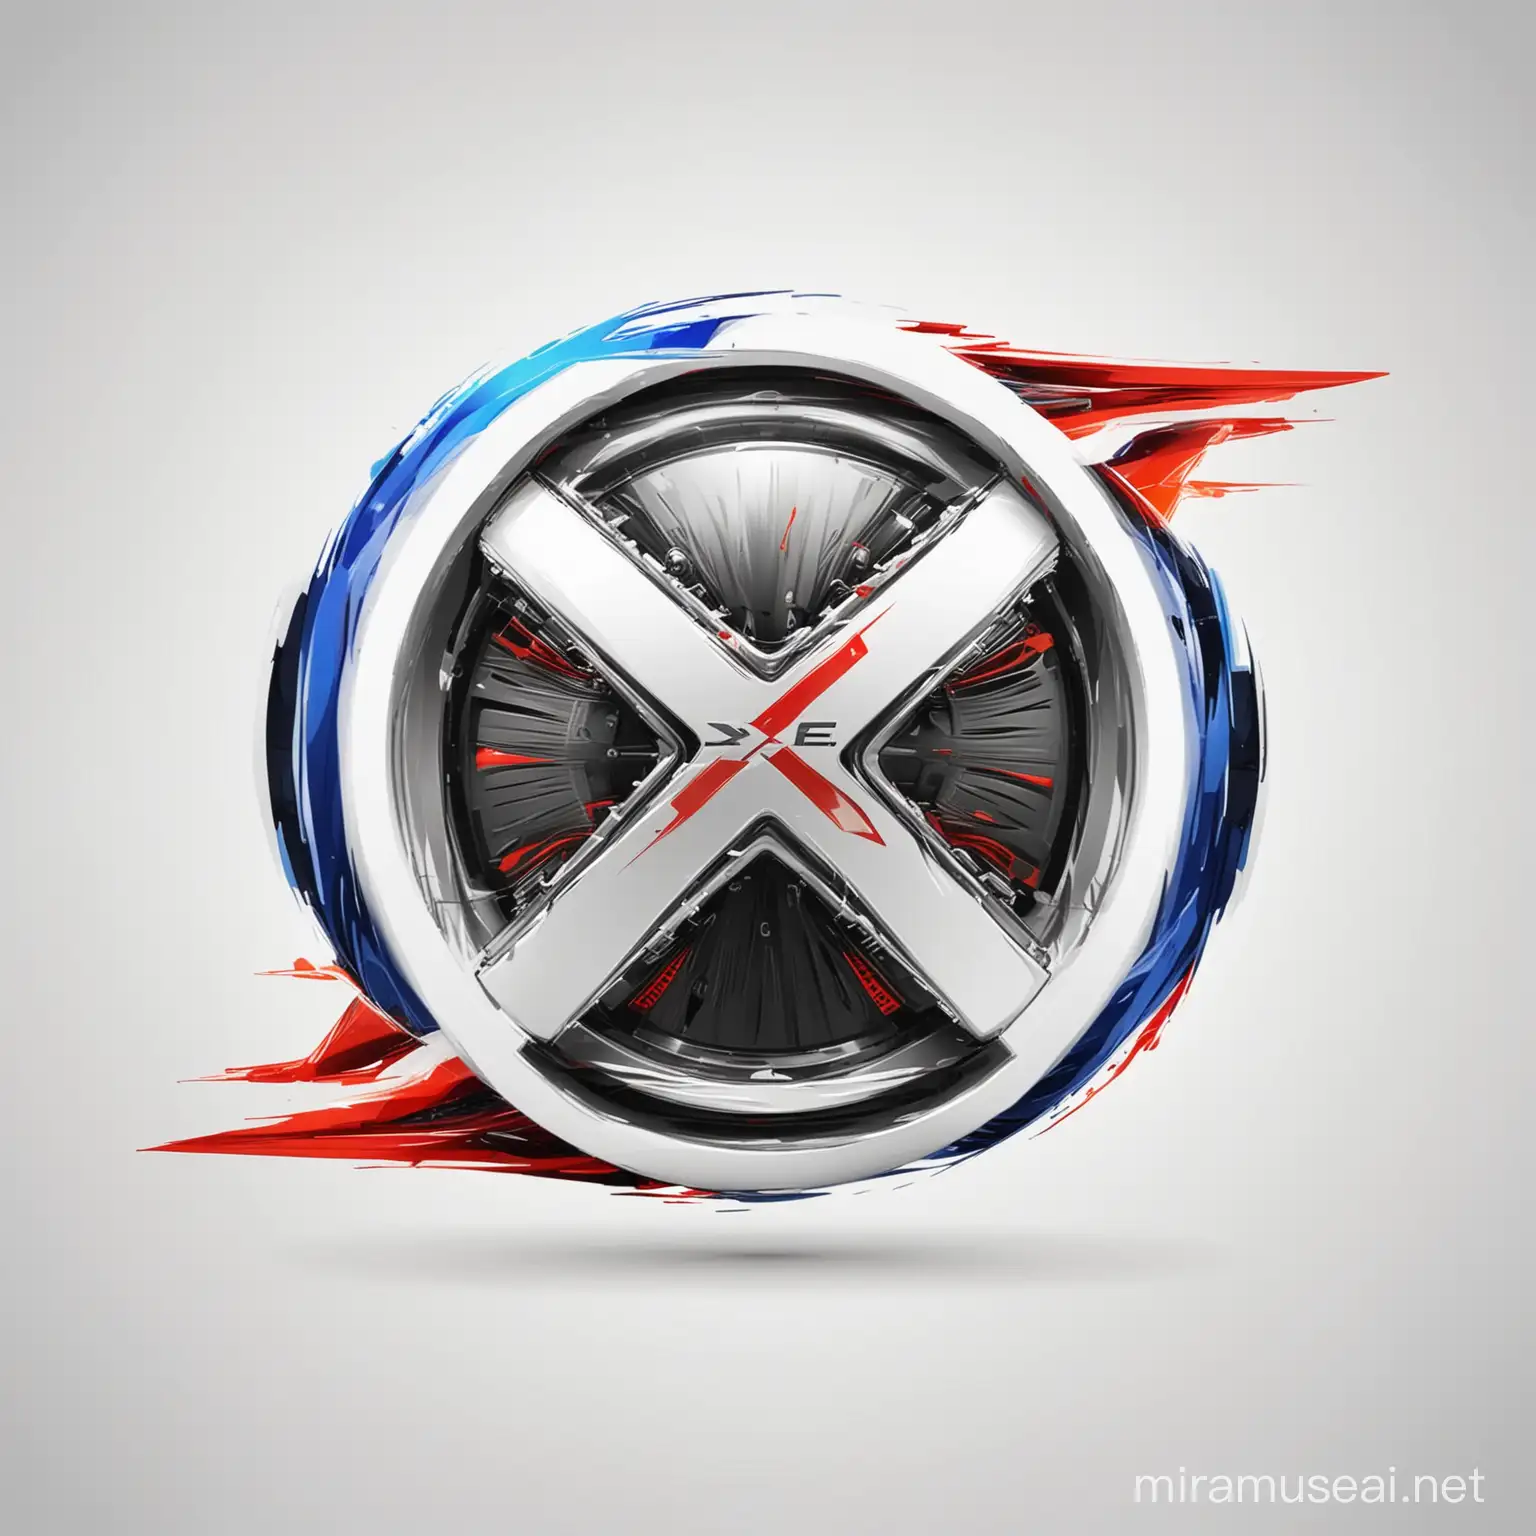 elegant vector art logo "X-FILE", "AUTO SPORT",with speed effects, a combination of white, red and blue. white clean background